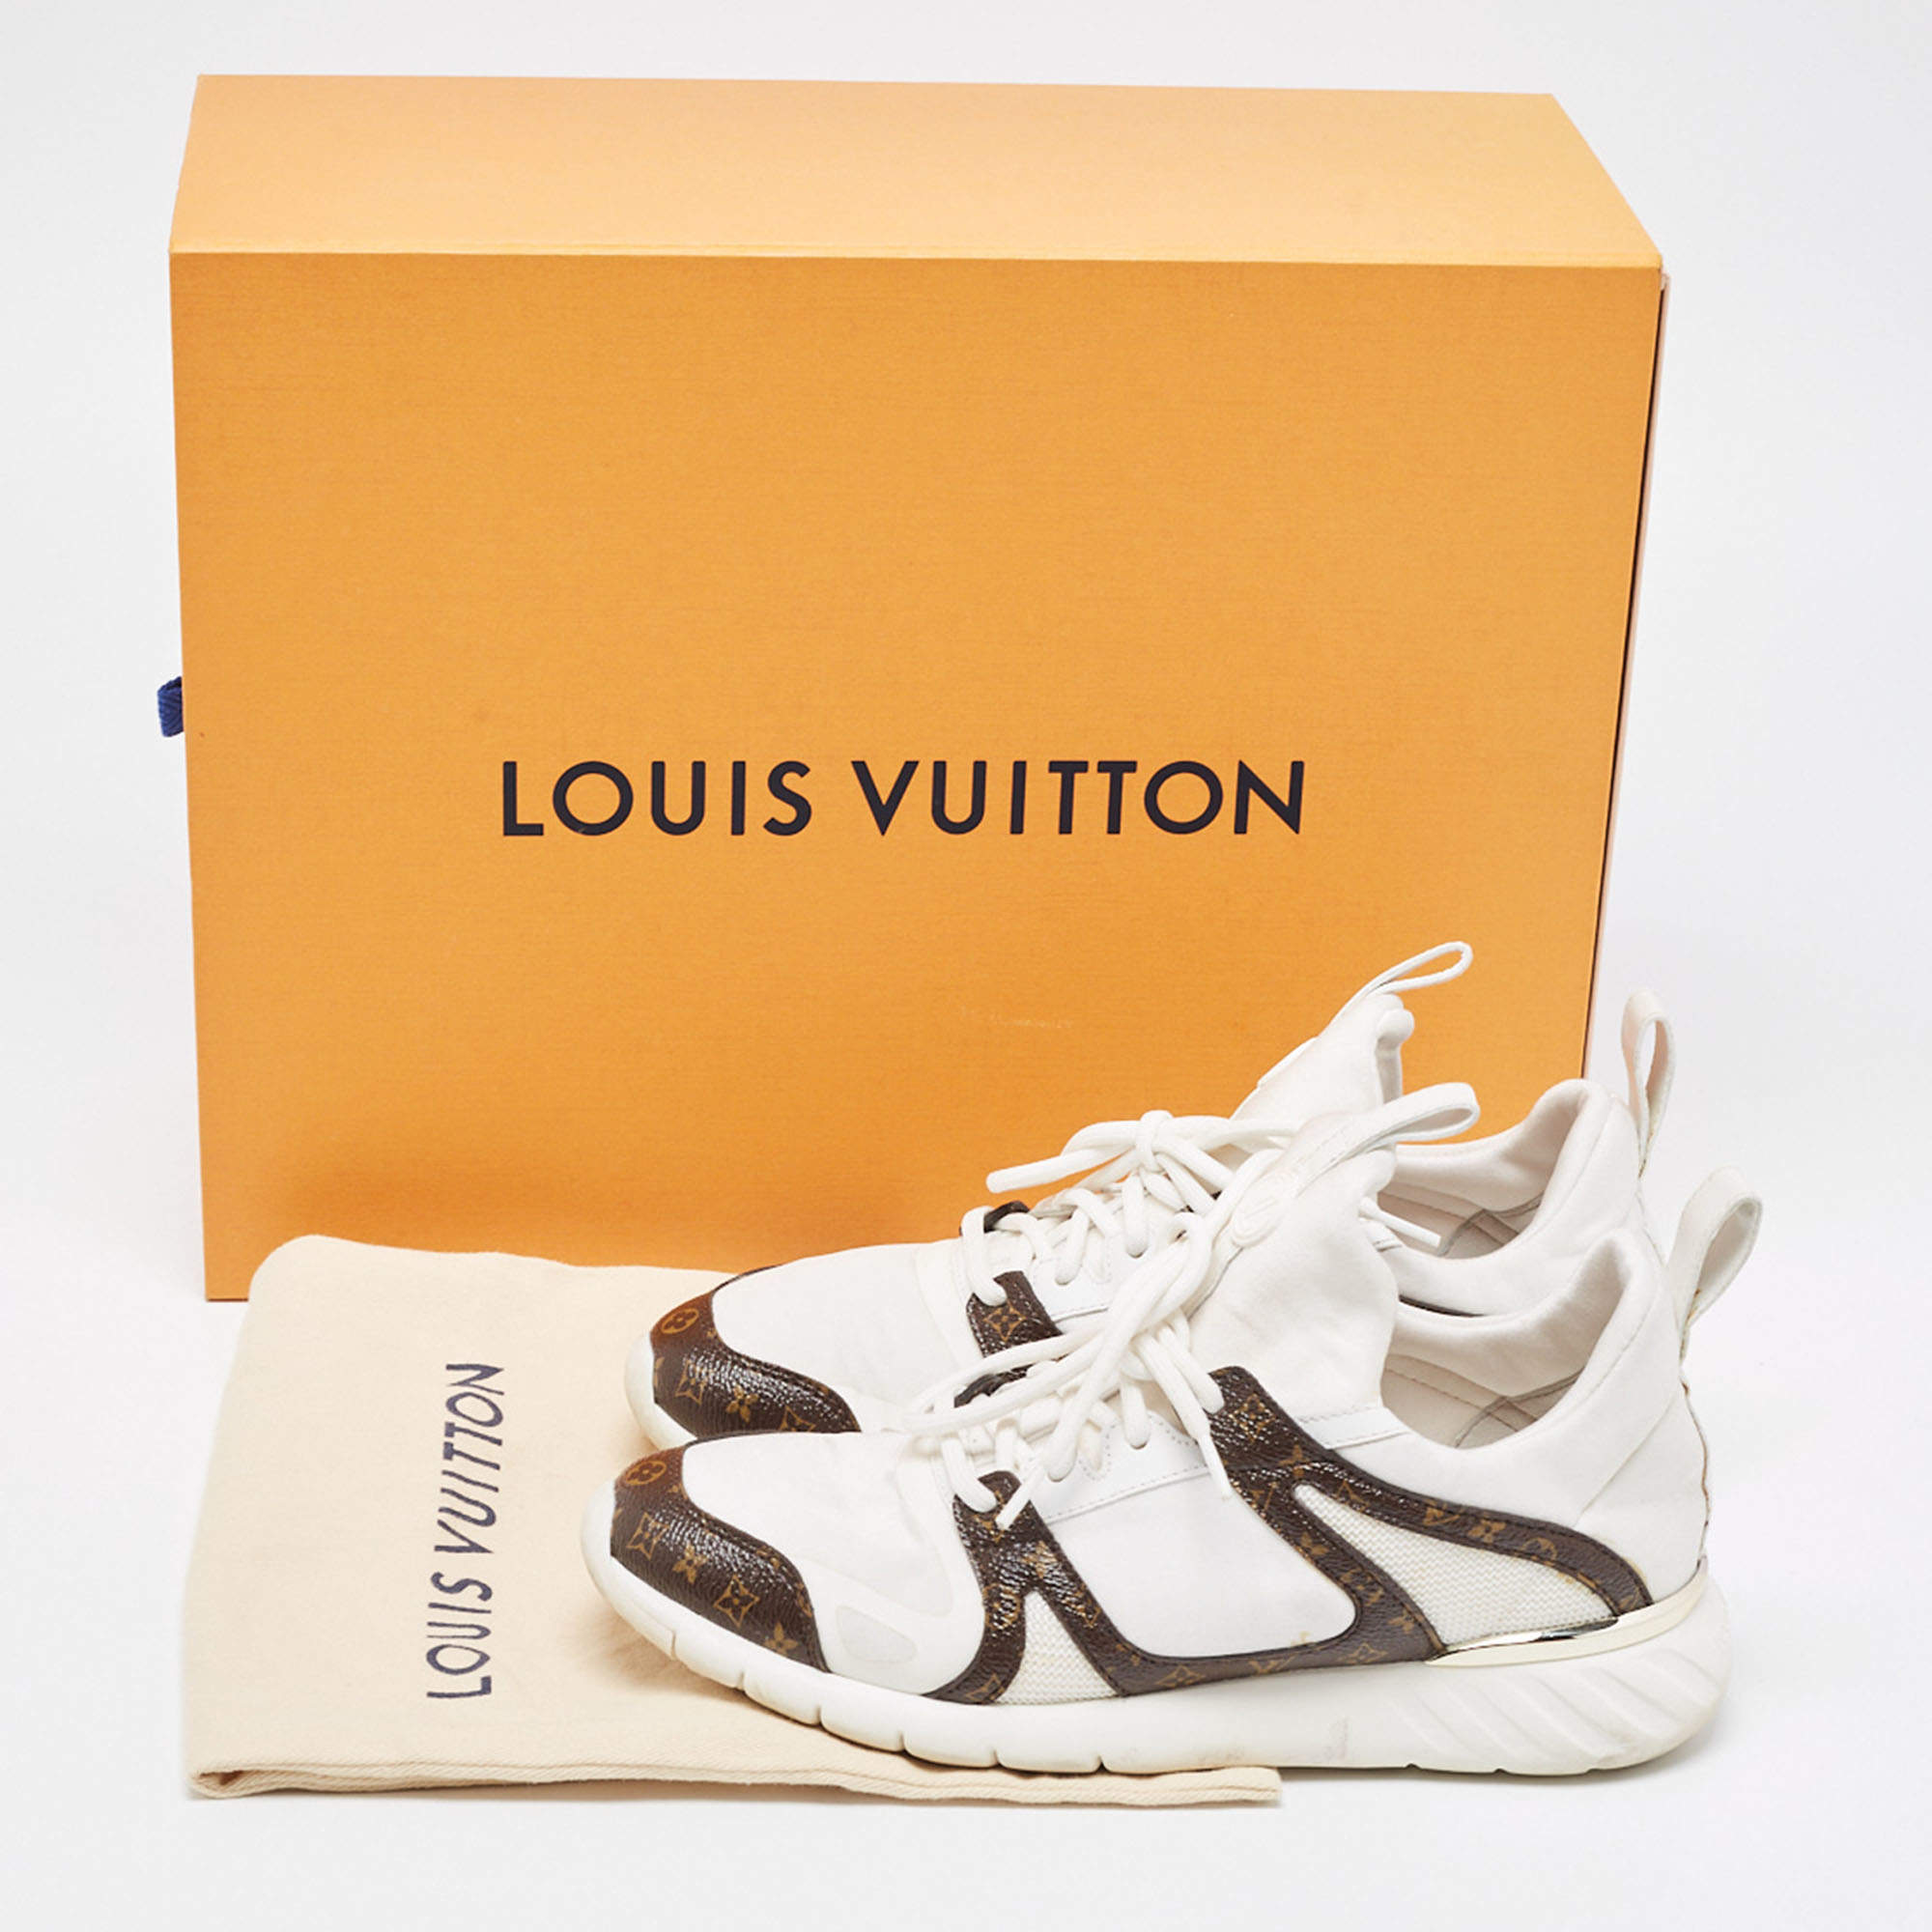 Authentic New/Boxed Condition Womens Louis Vuitton AfterGame Sneakers